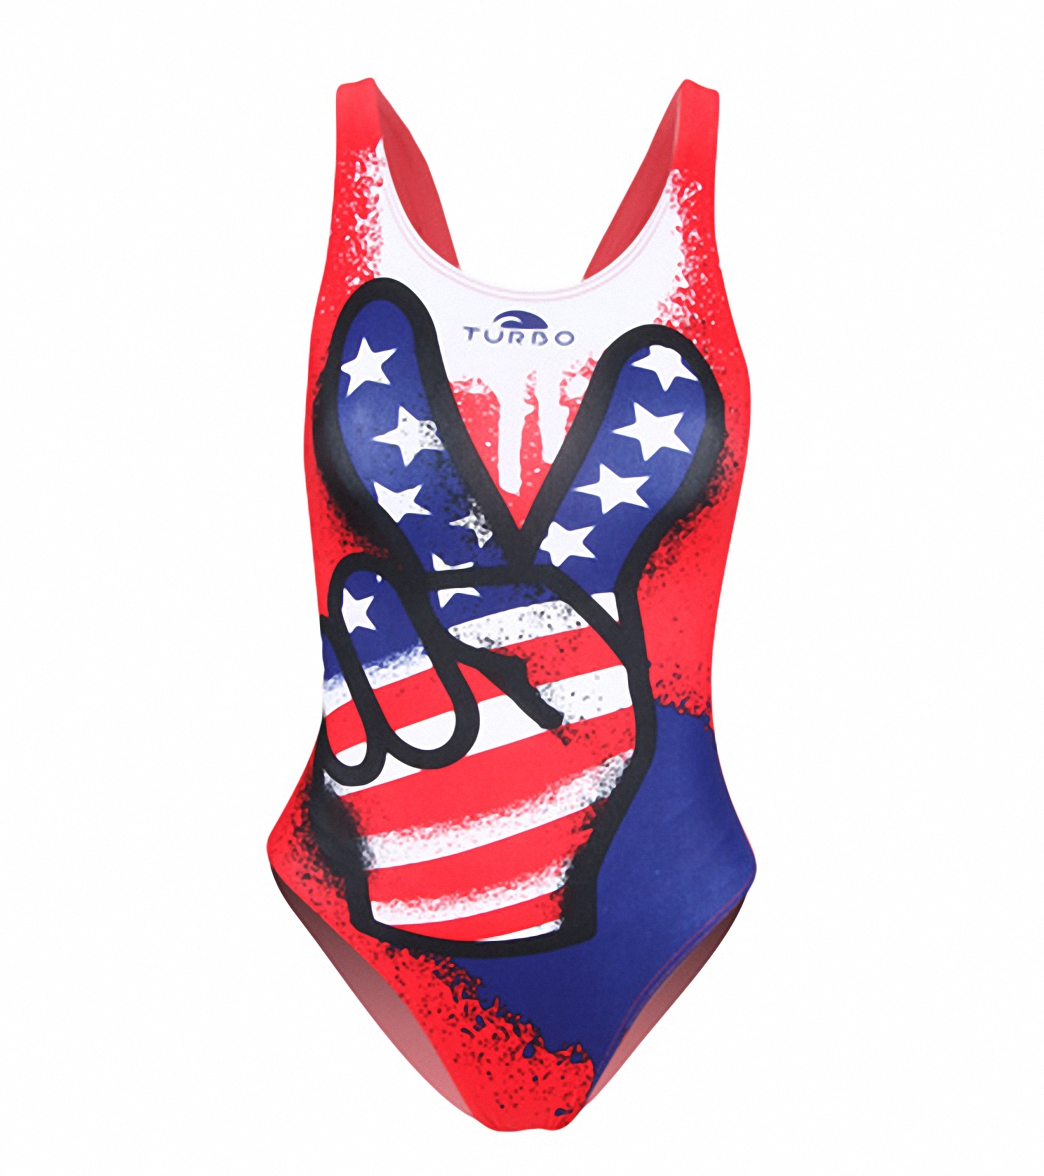 Turbo Victory Women's Training Suit at SwimOutlet.com - Free Shipping